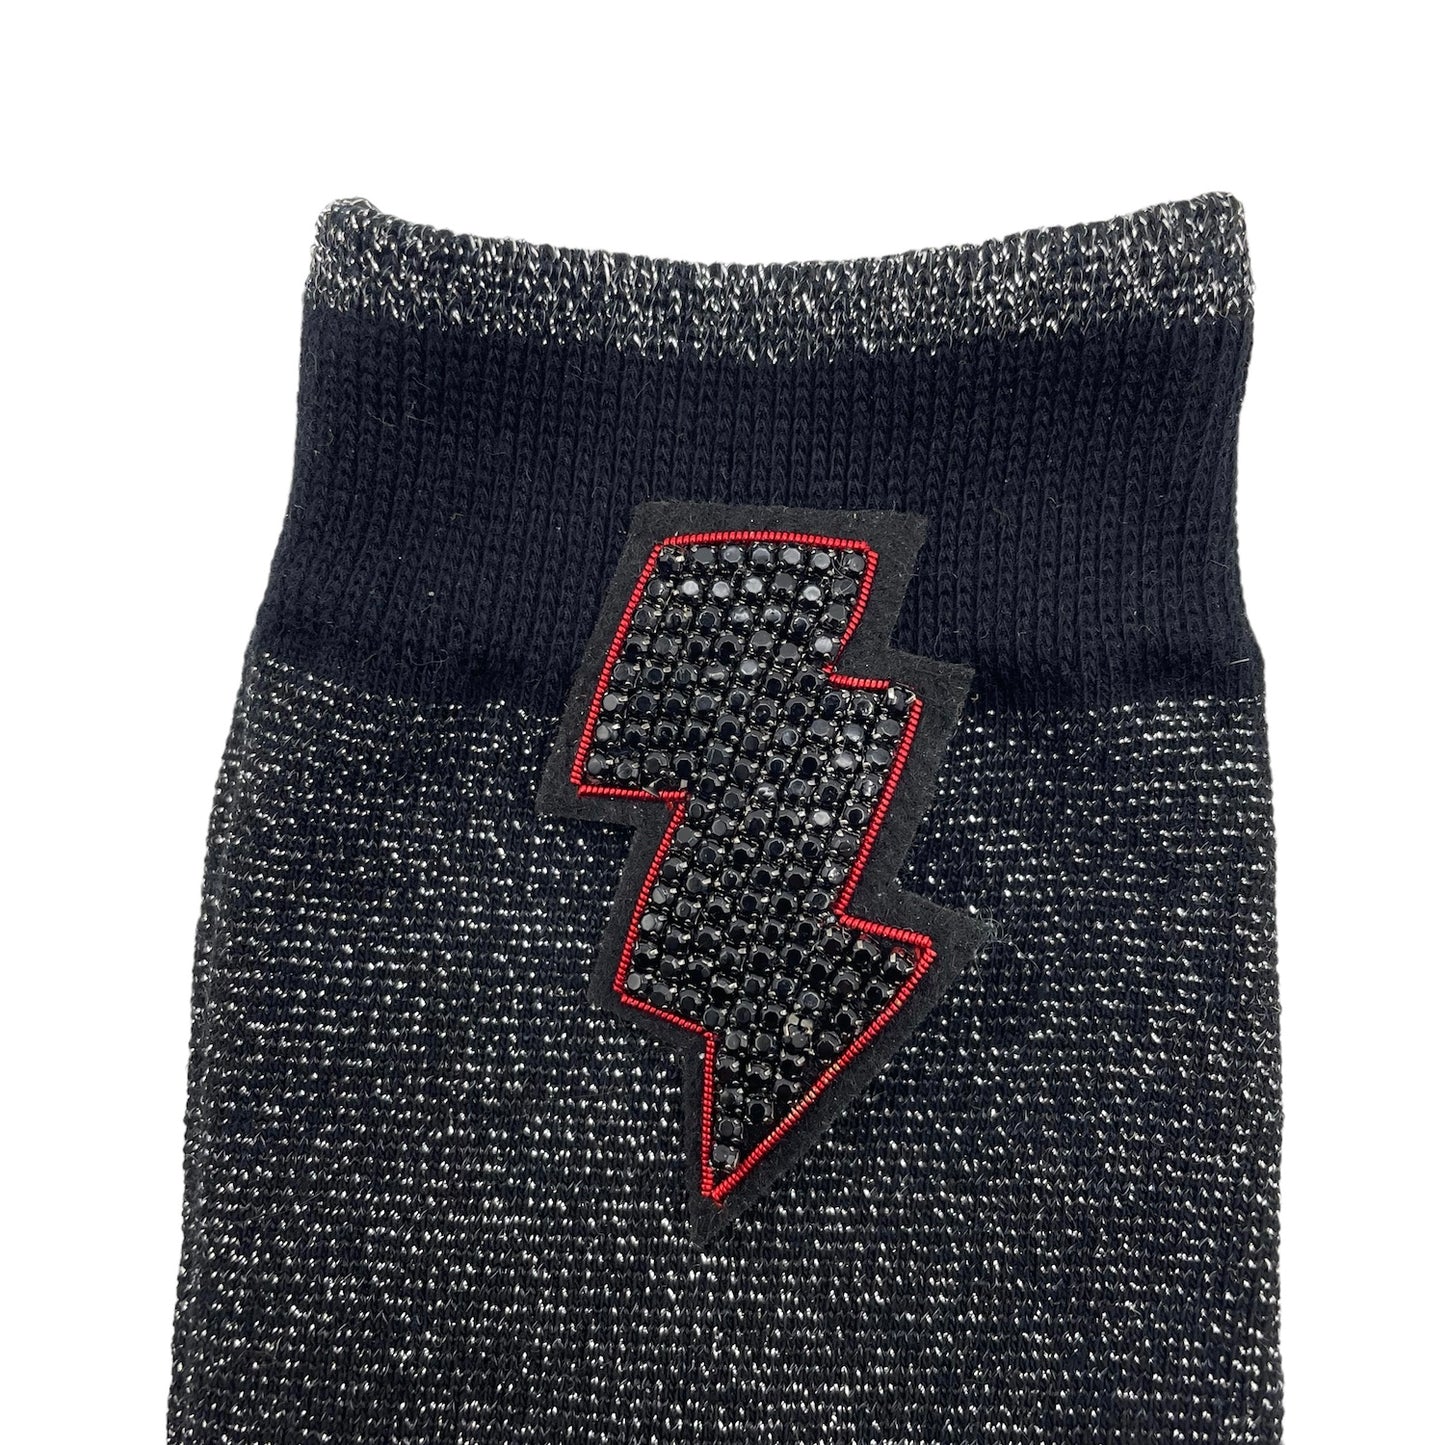 Tokyo socks in black with a large beaded lightning bolt pin